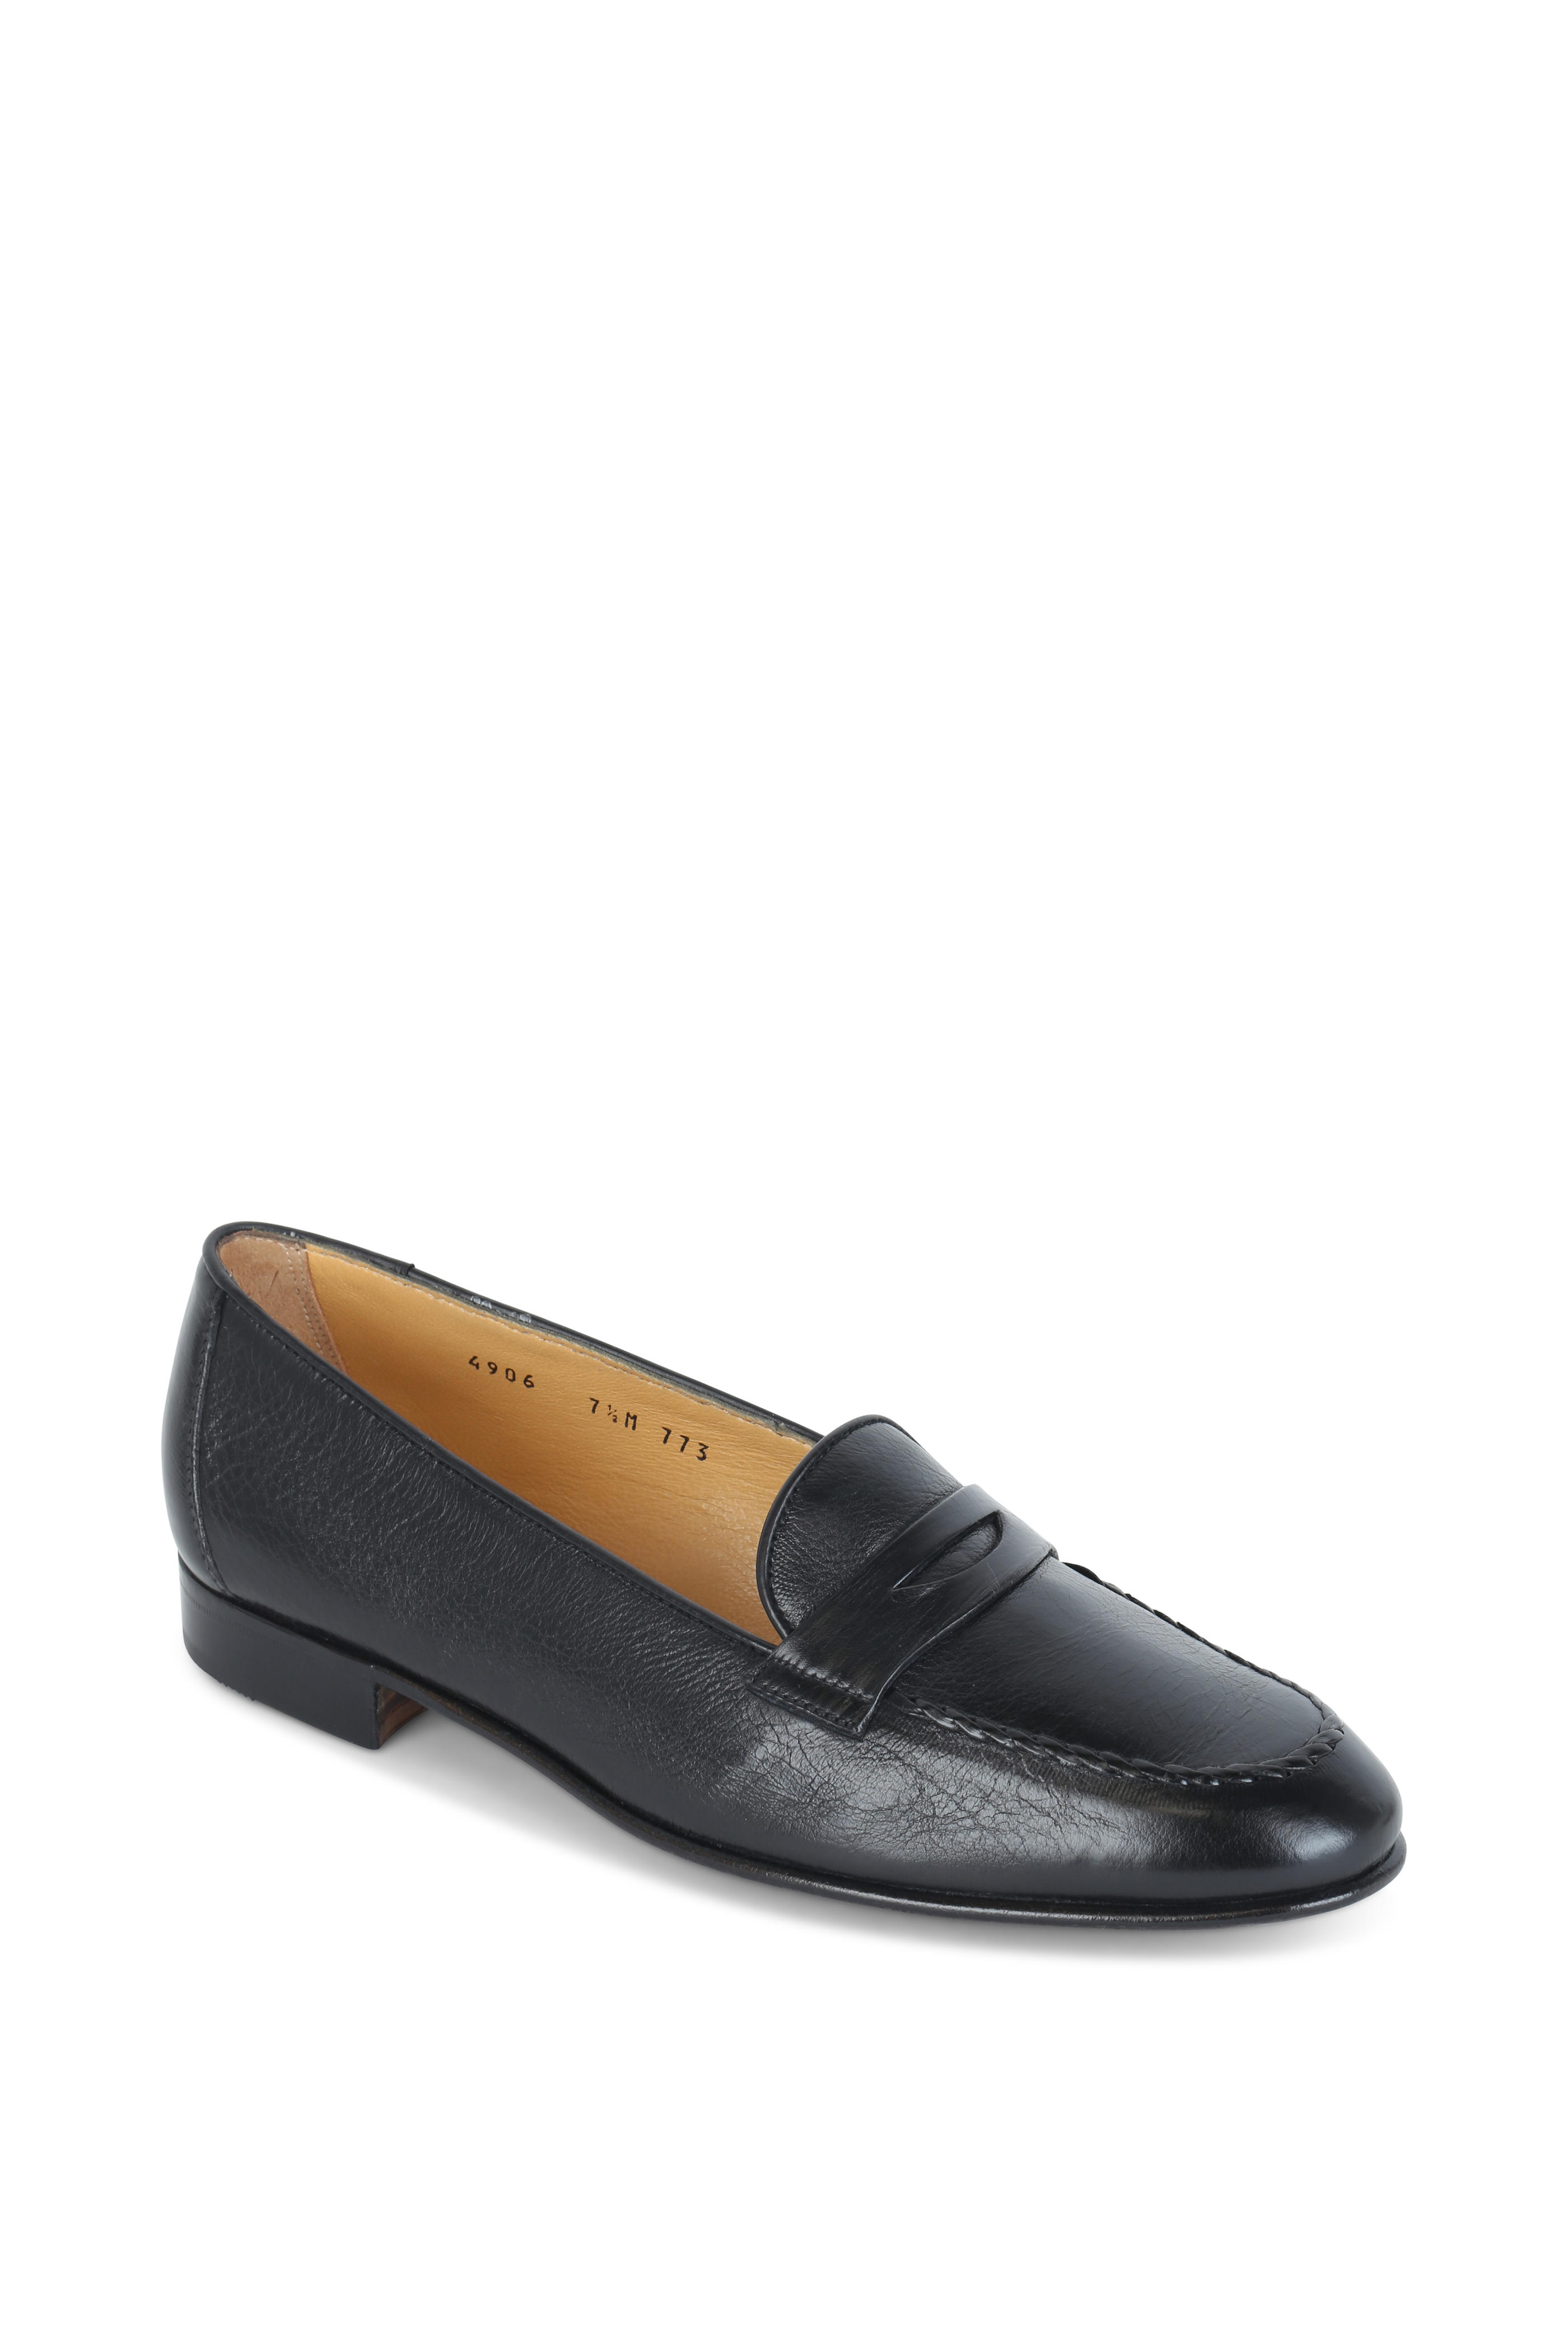 Gravati - Black Leather Penny Loafer | Mitchell Stores